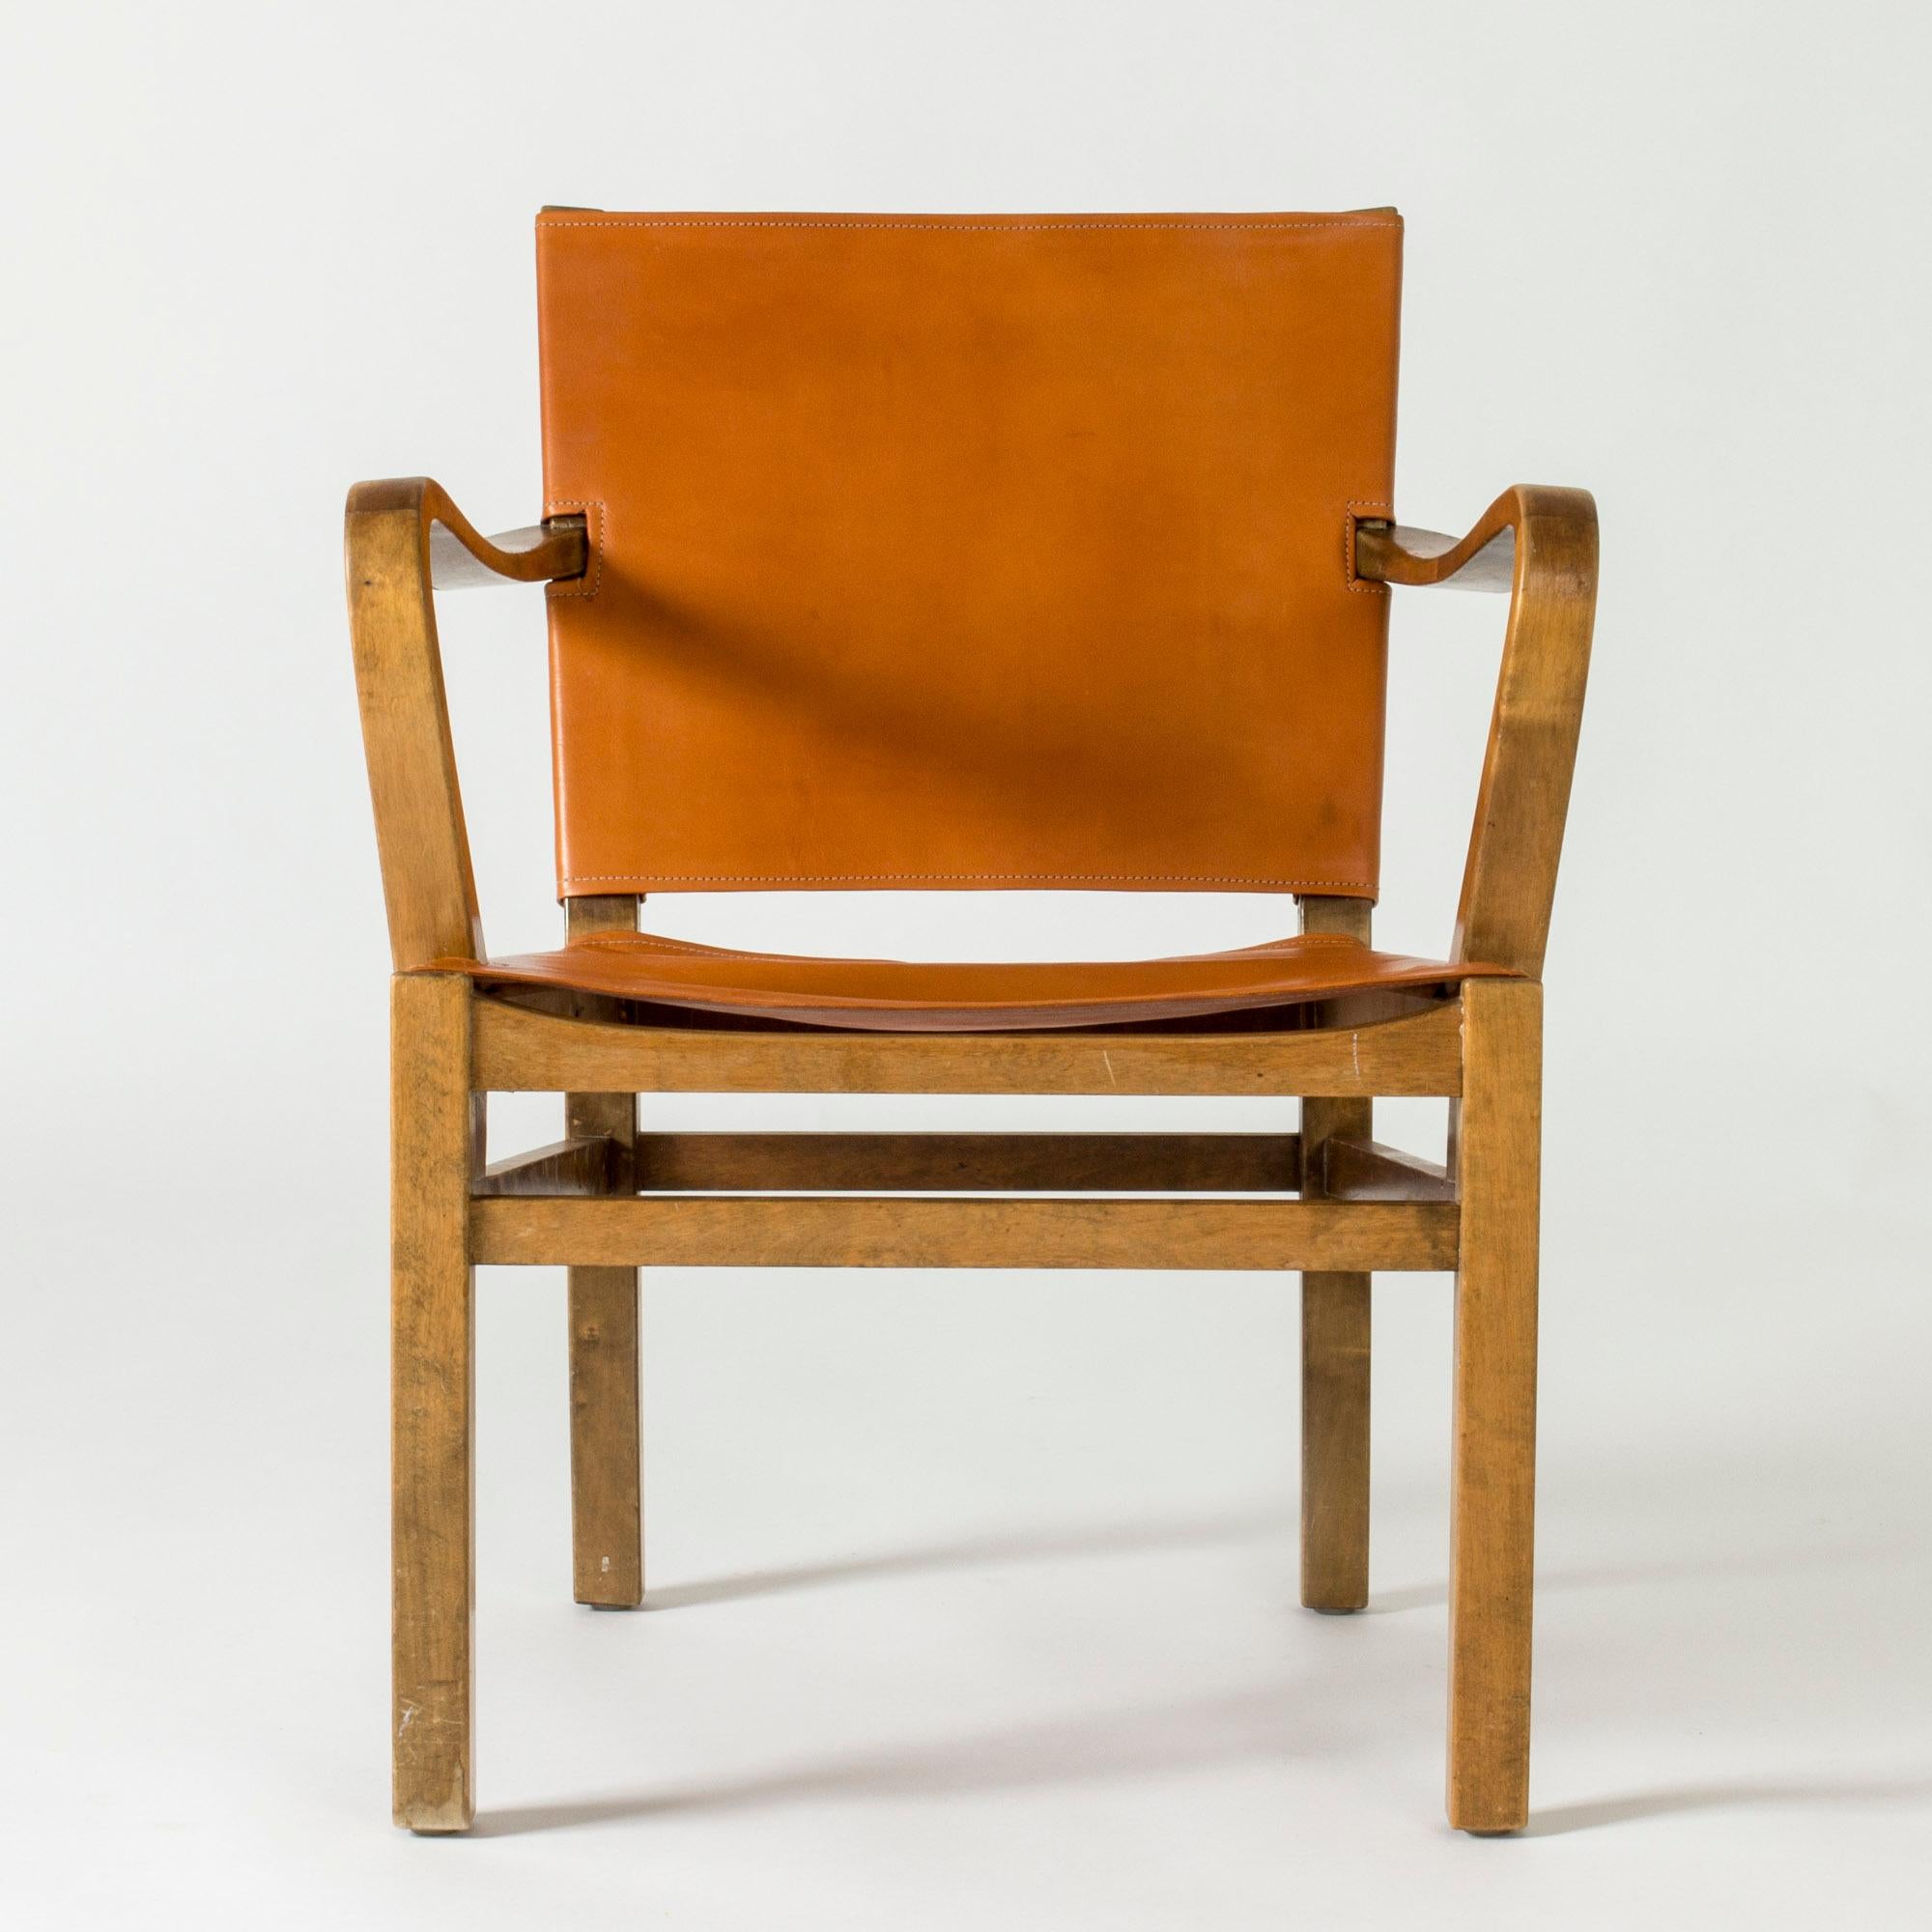 Leather Scandinavian Modern Armchairs by Elias Svedberg, Sweden, 1930s For Sale